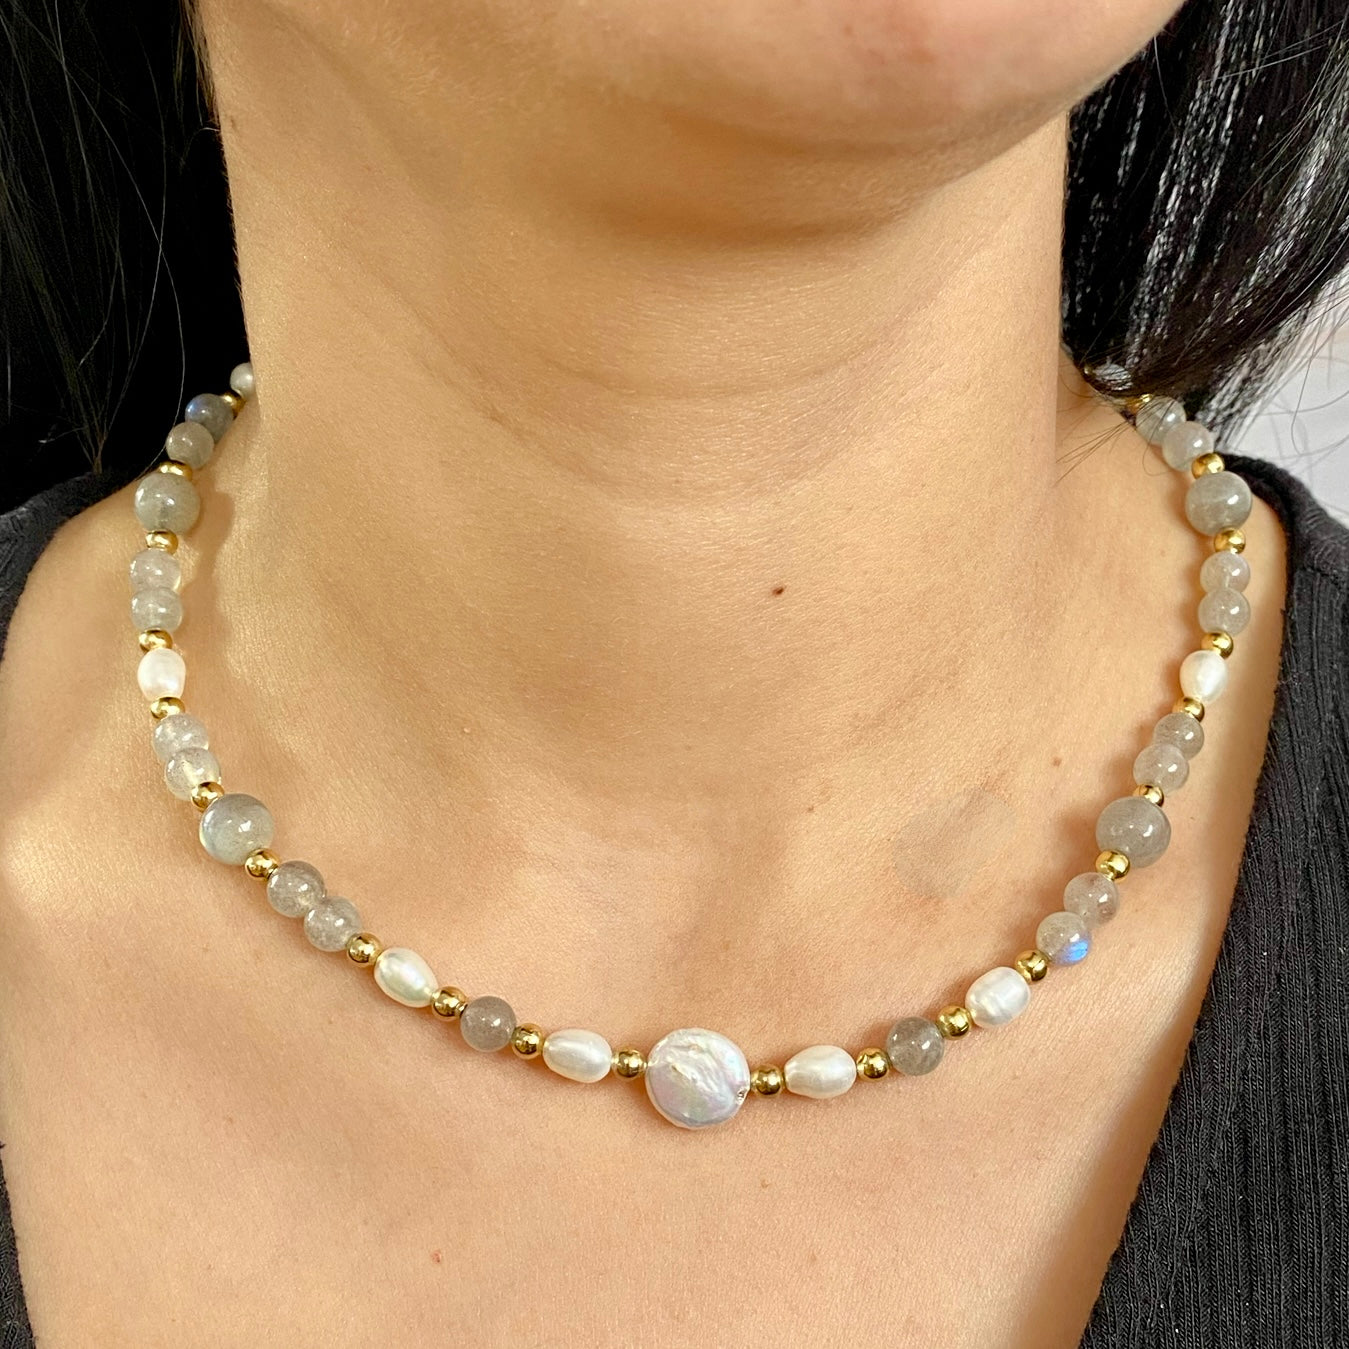 Lunar Luster: Freshwater Pearls and Moonstone Choker